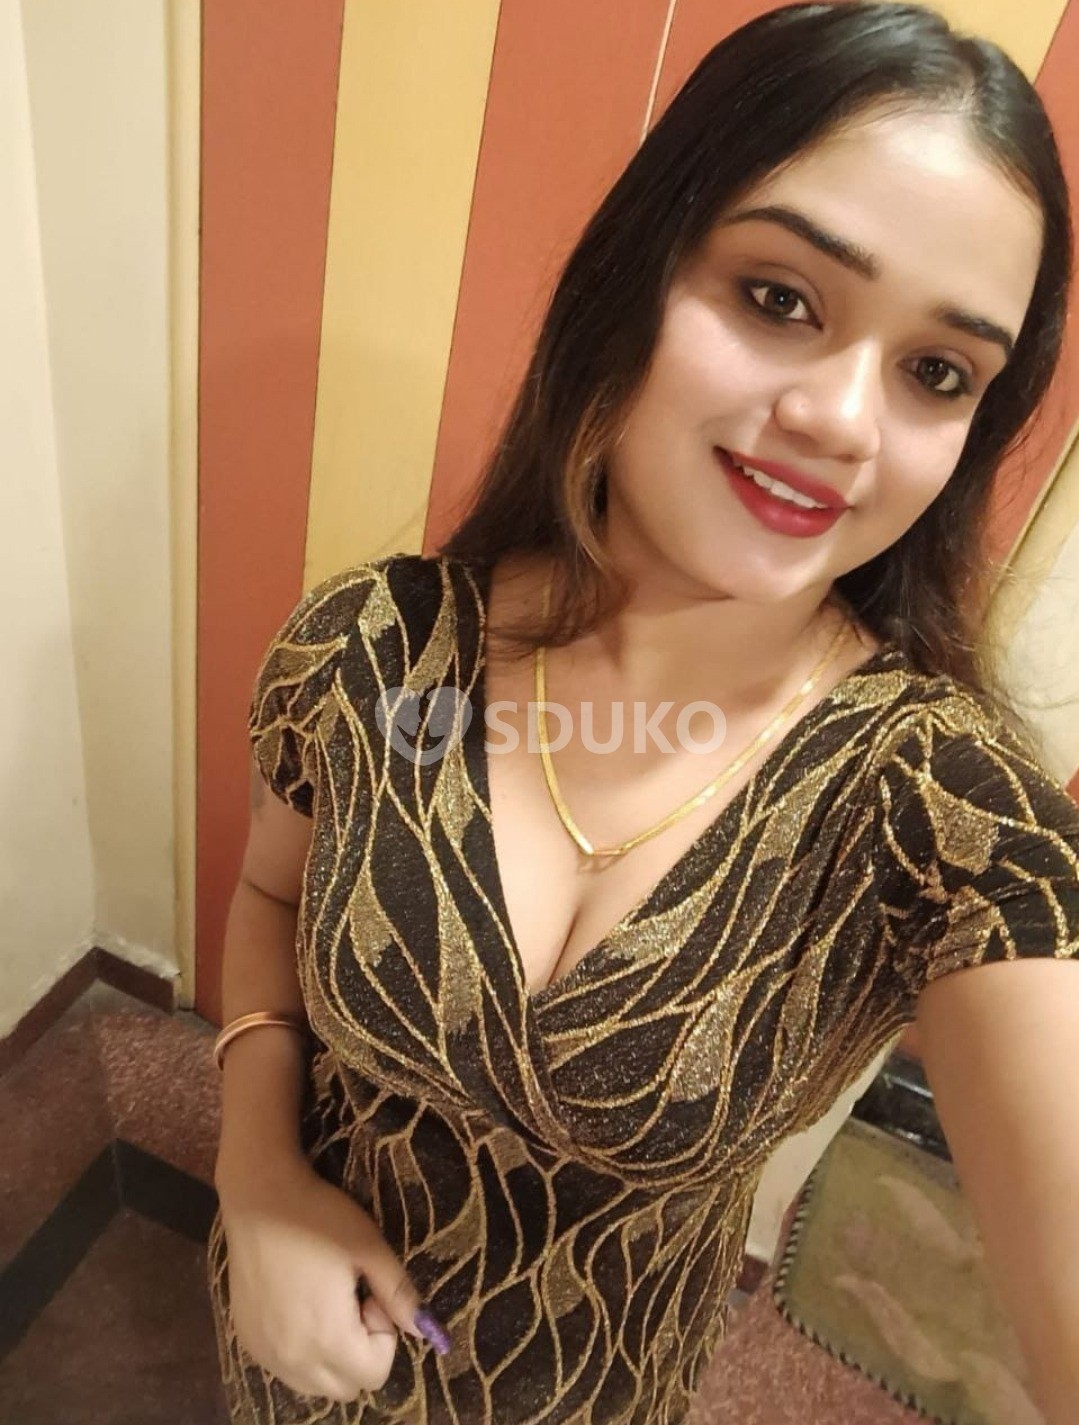 Kolkata TODAY LOW PRICE 100% SAFE AND SECURE GENUINE CALL GIRL AFFORDABLE PRICE CALL NOW.....